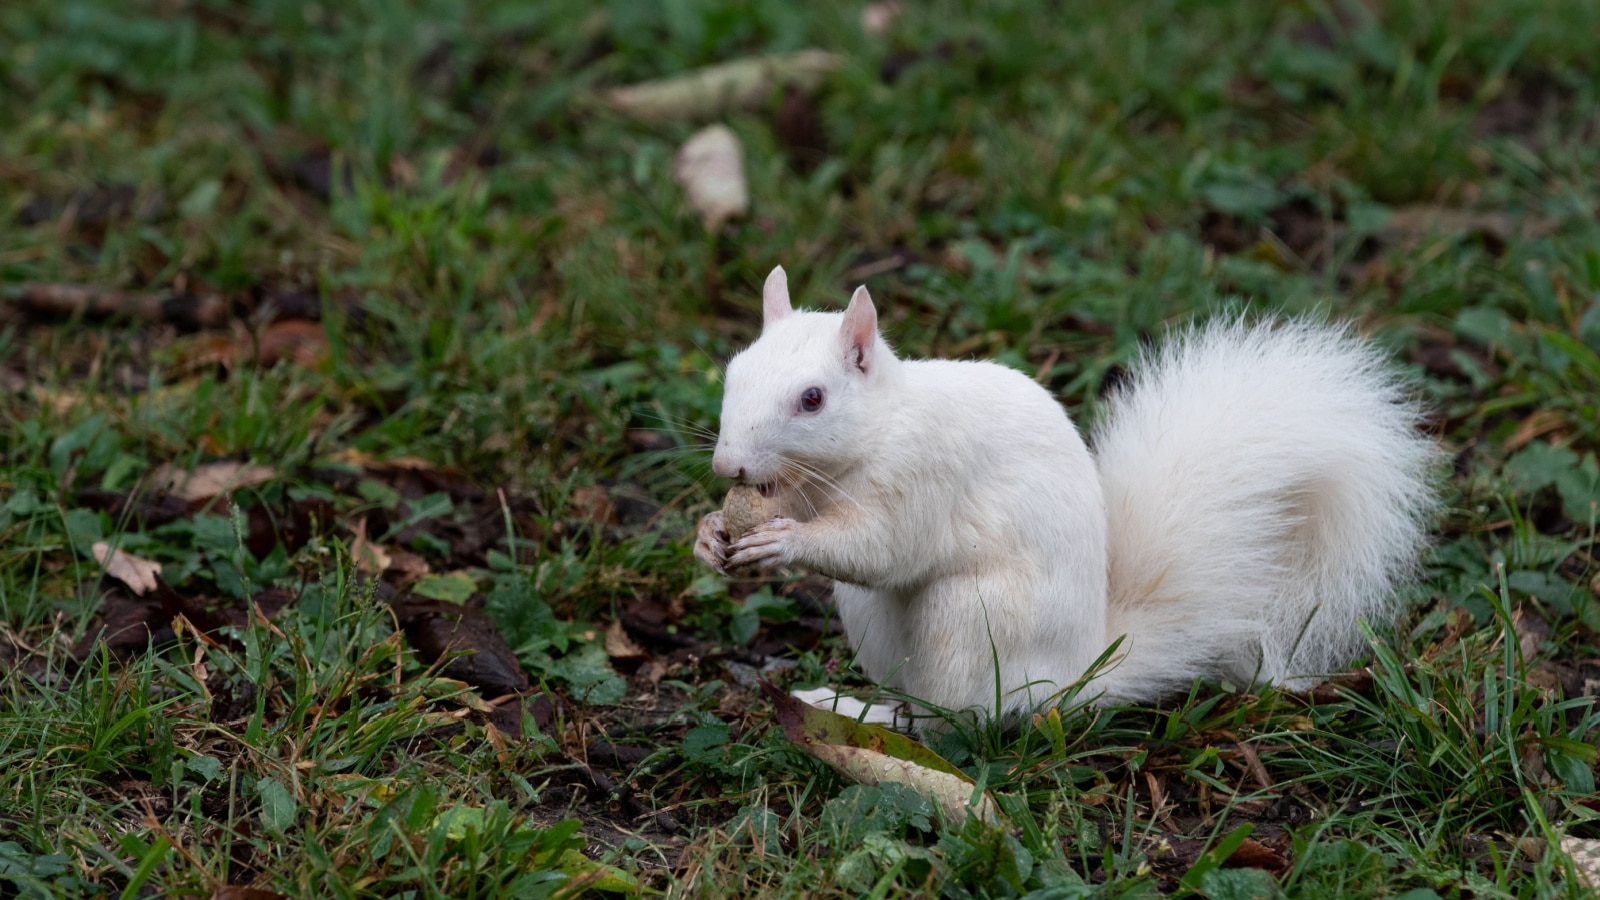 <p>You might not think of Illinois as a hotspot for animal lovers, but it’s one of the best places in the world to see albino squirrels in their natural habitat. The city proudly proclaims itself as “The Home of the White Squirrels,” and you can see these unique critters all around the area. Squirrels may not seem exciting, but albino animals are very rare and an interesting sight to behold.</p>